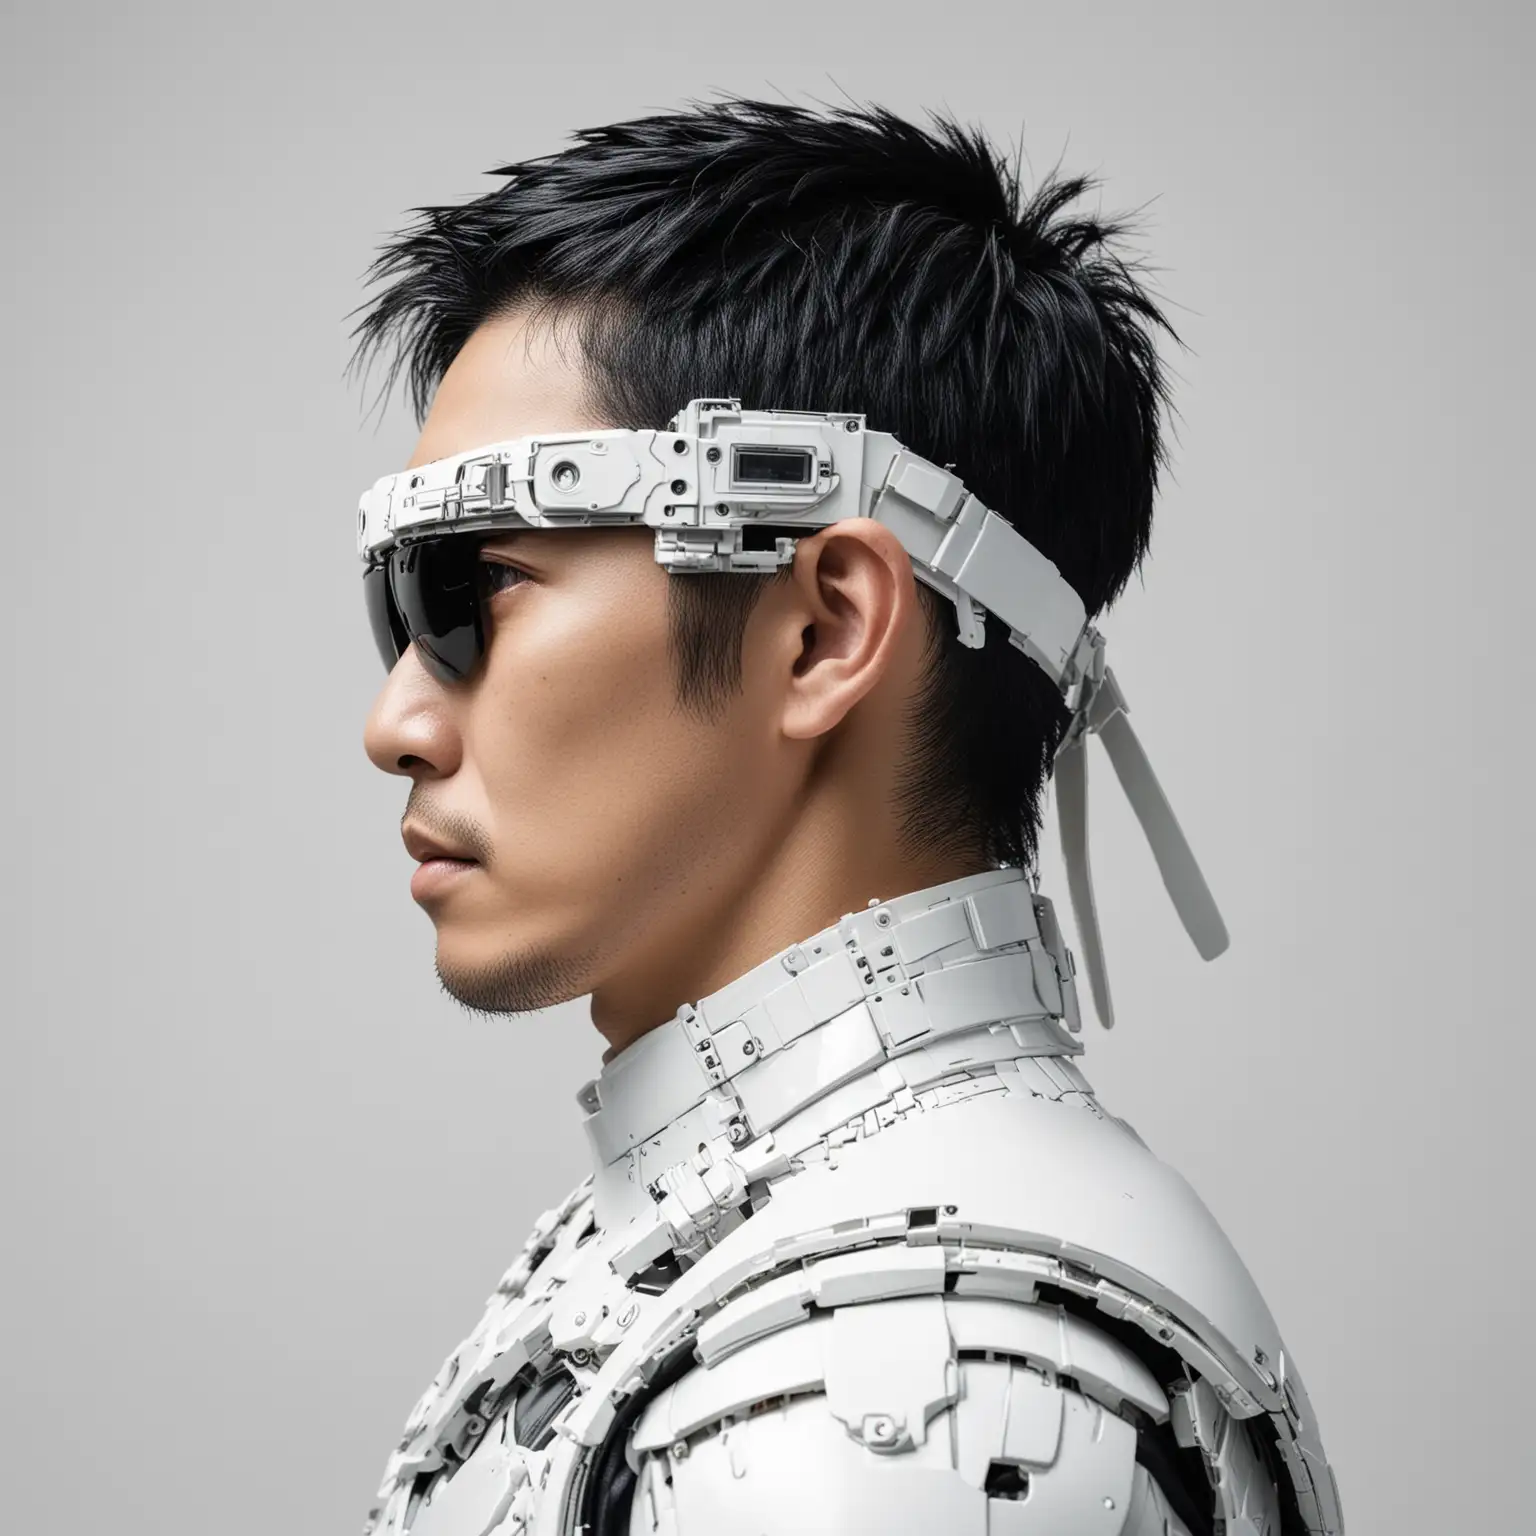 Heroic Japanese Man Portrait with Black Hair and White Bionic Eye on White Background